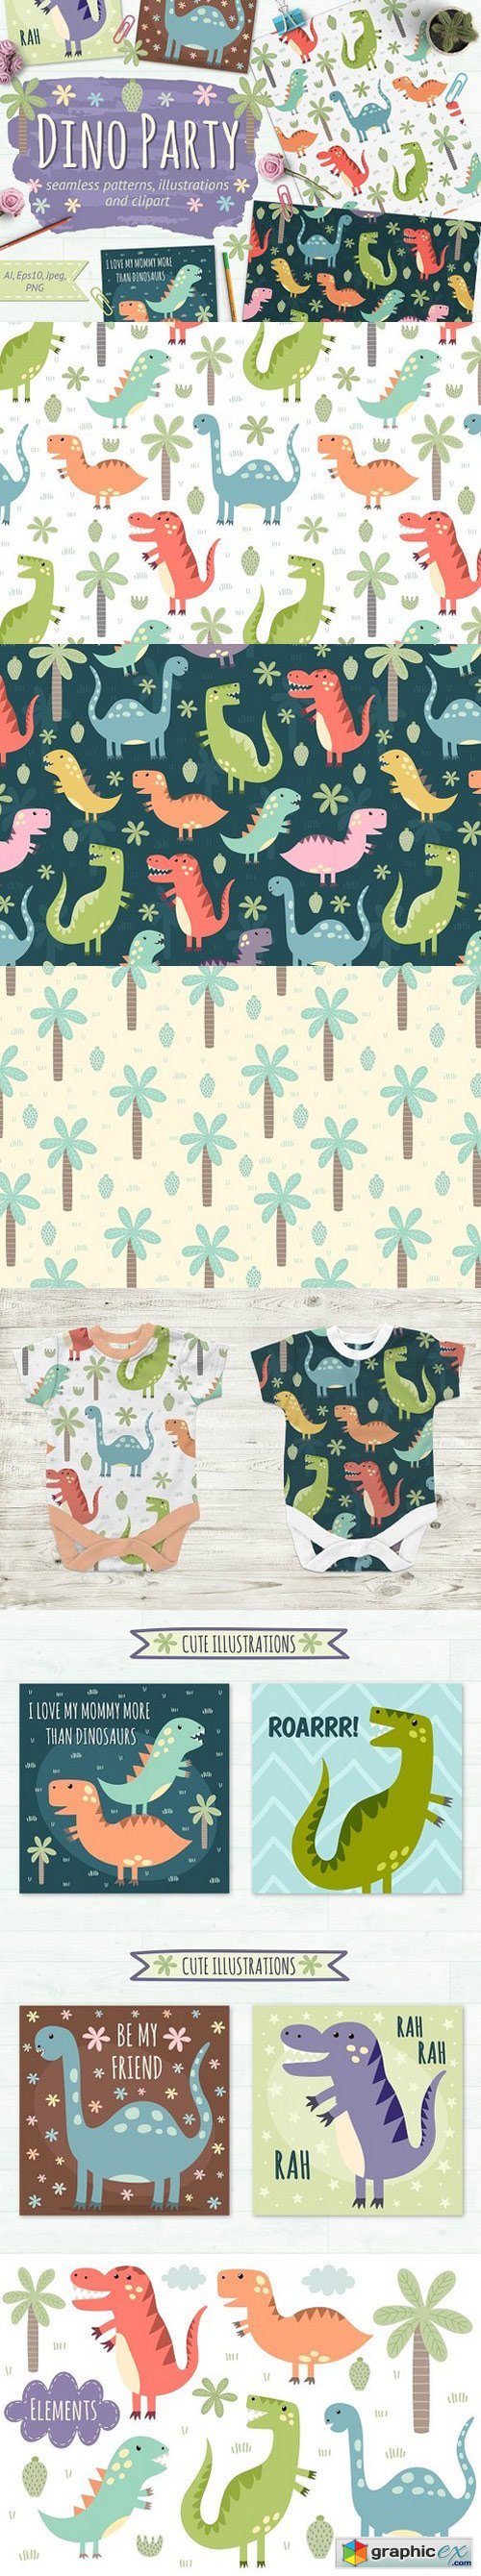 Dino Party: patterns & illustrations